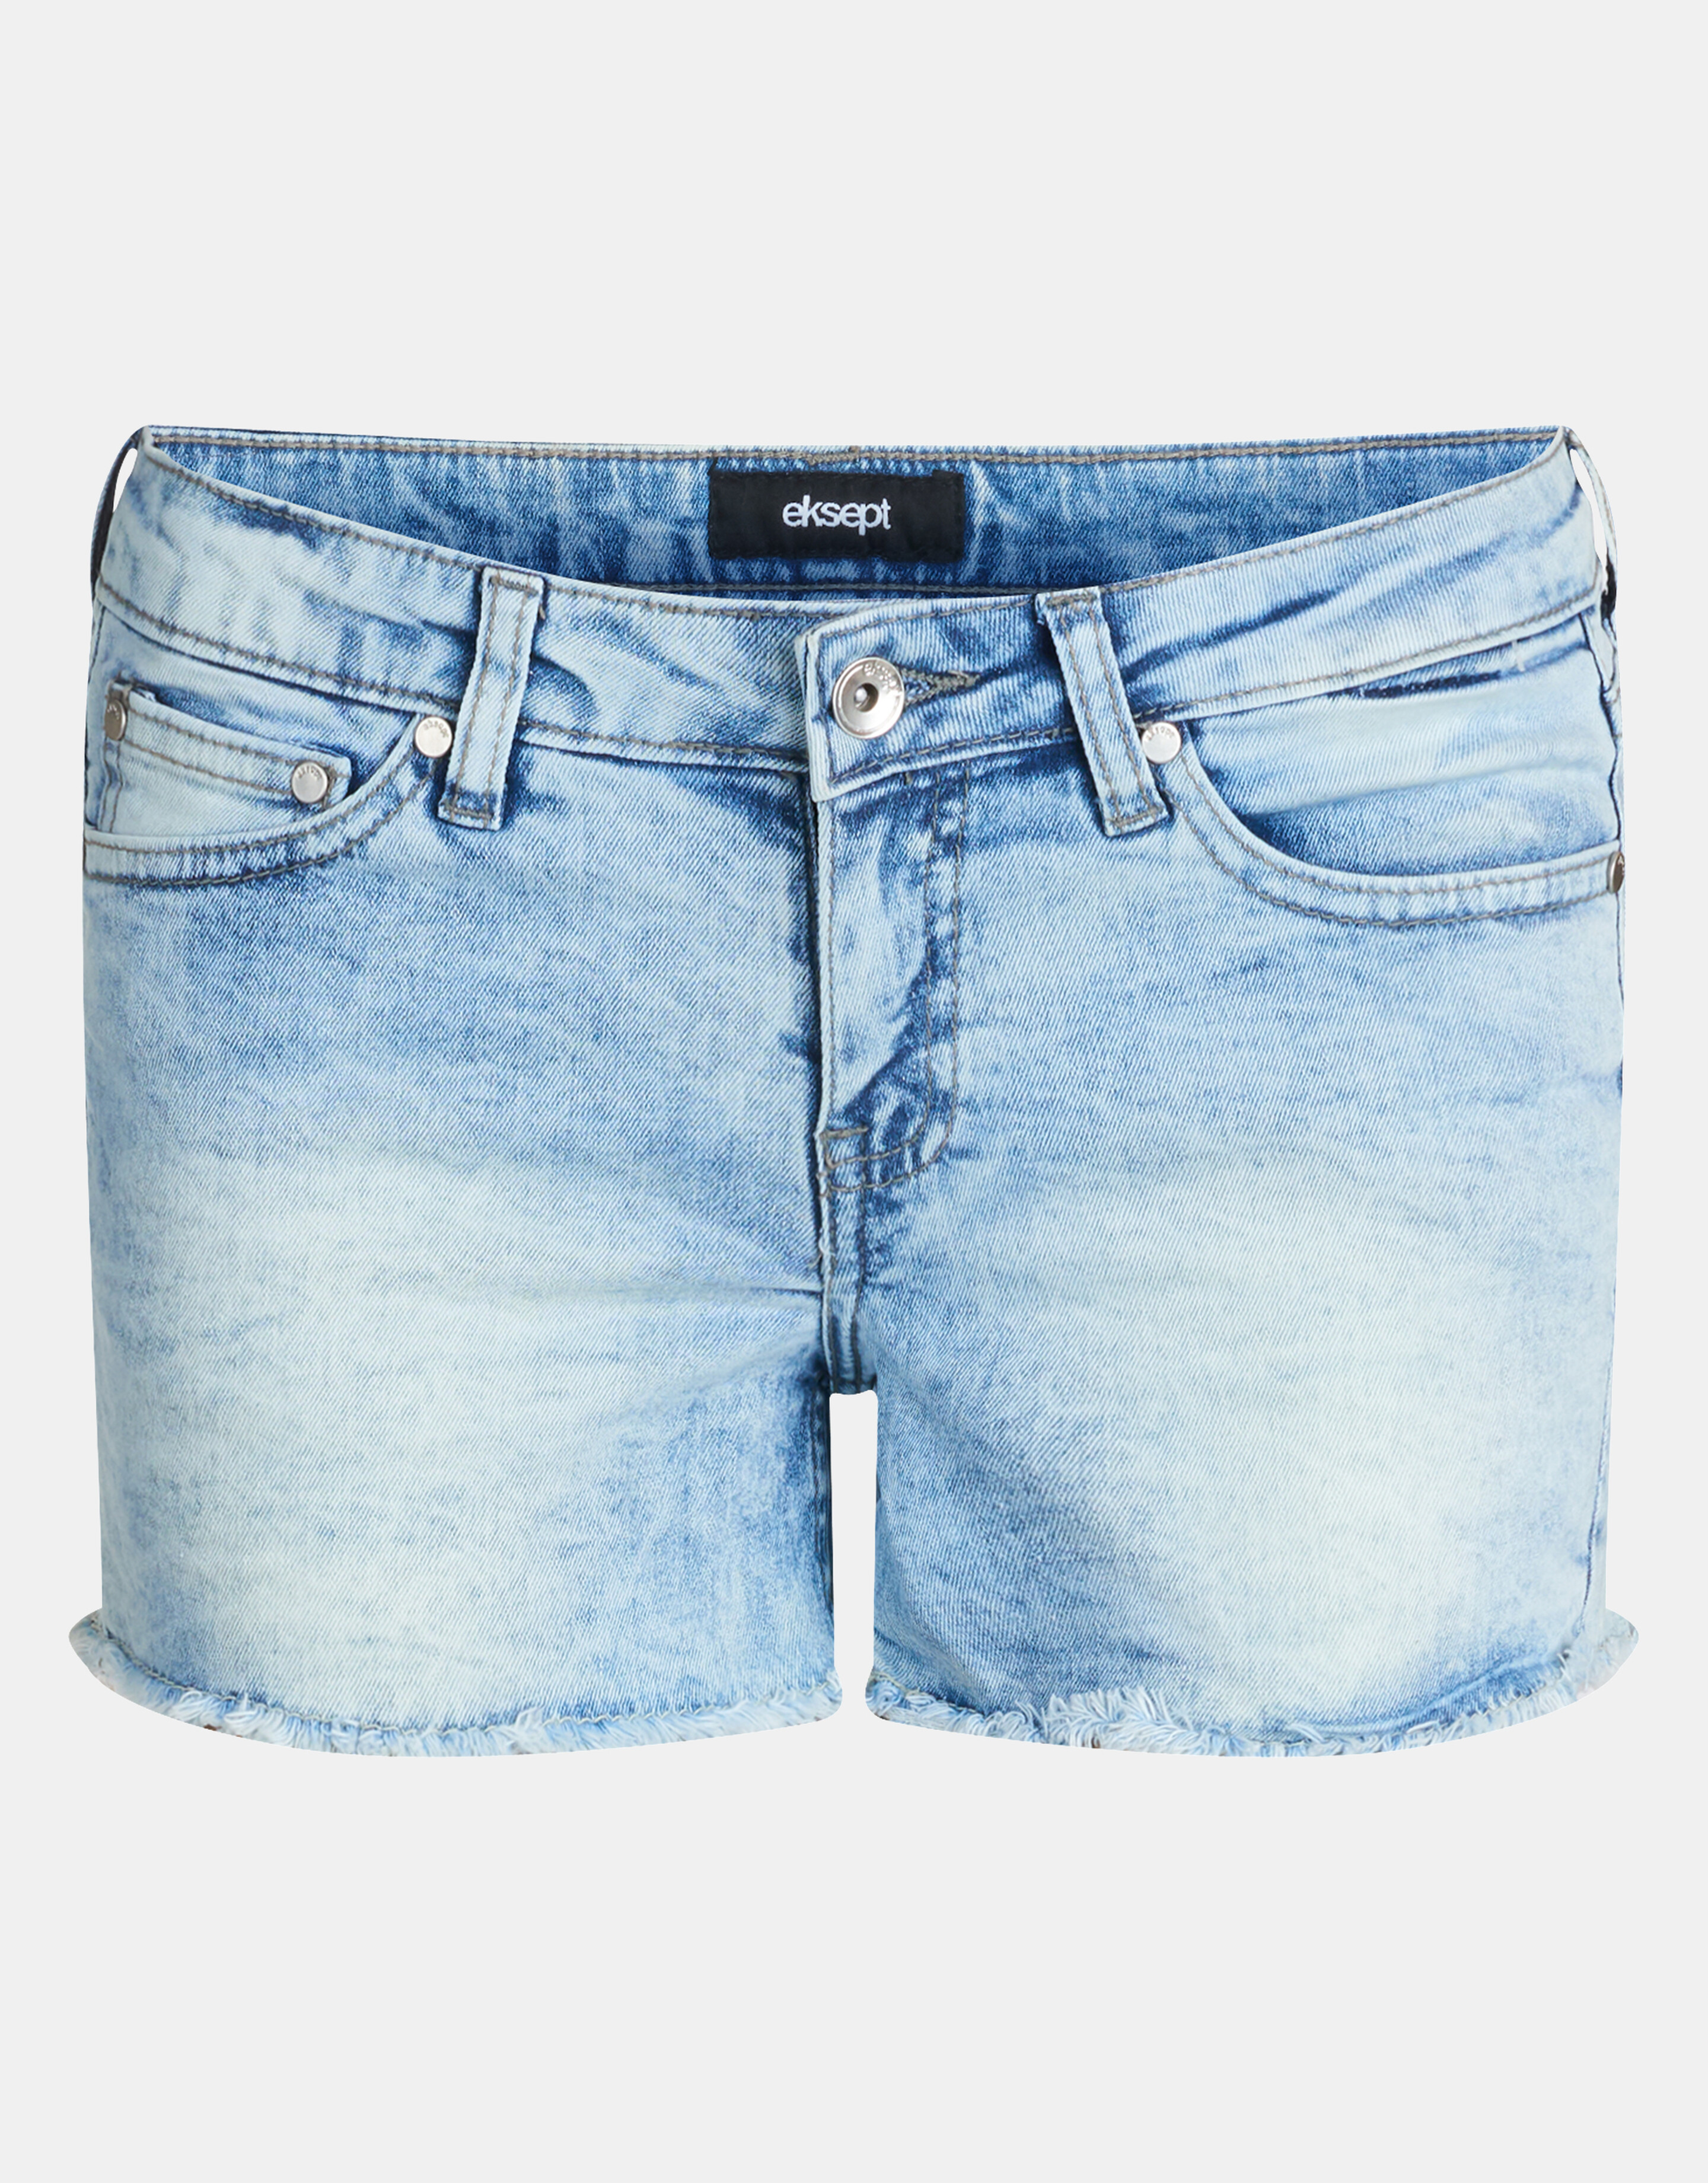 Charly One Shorts | EKSEPT SILVER